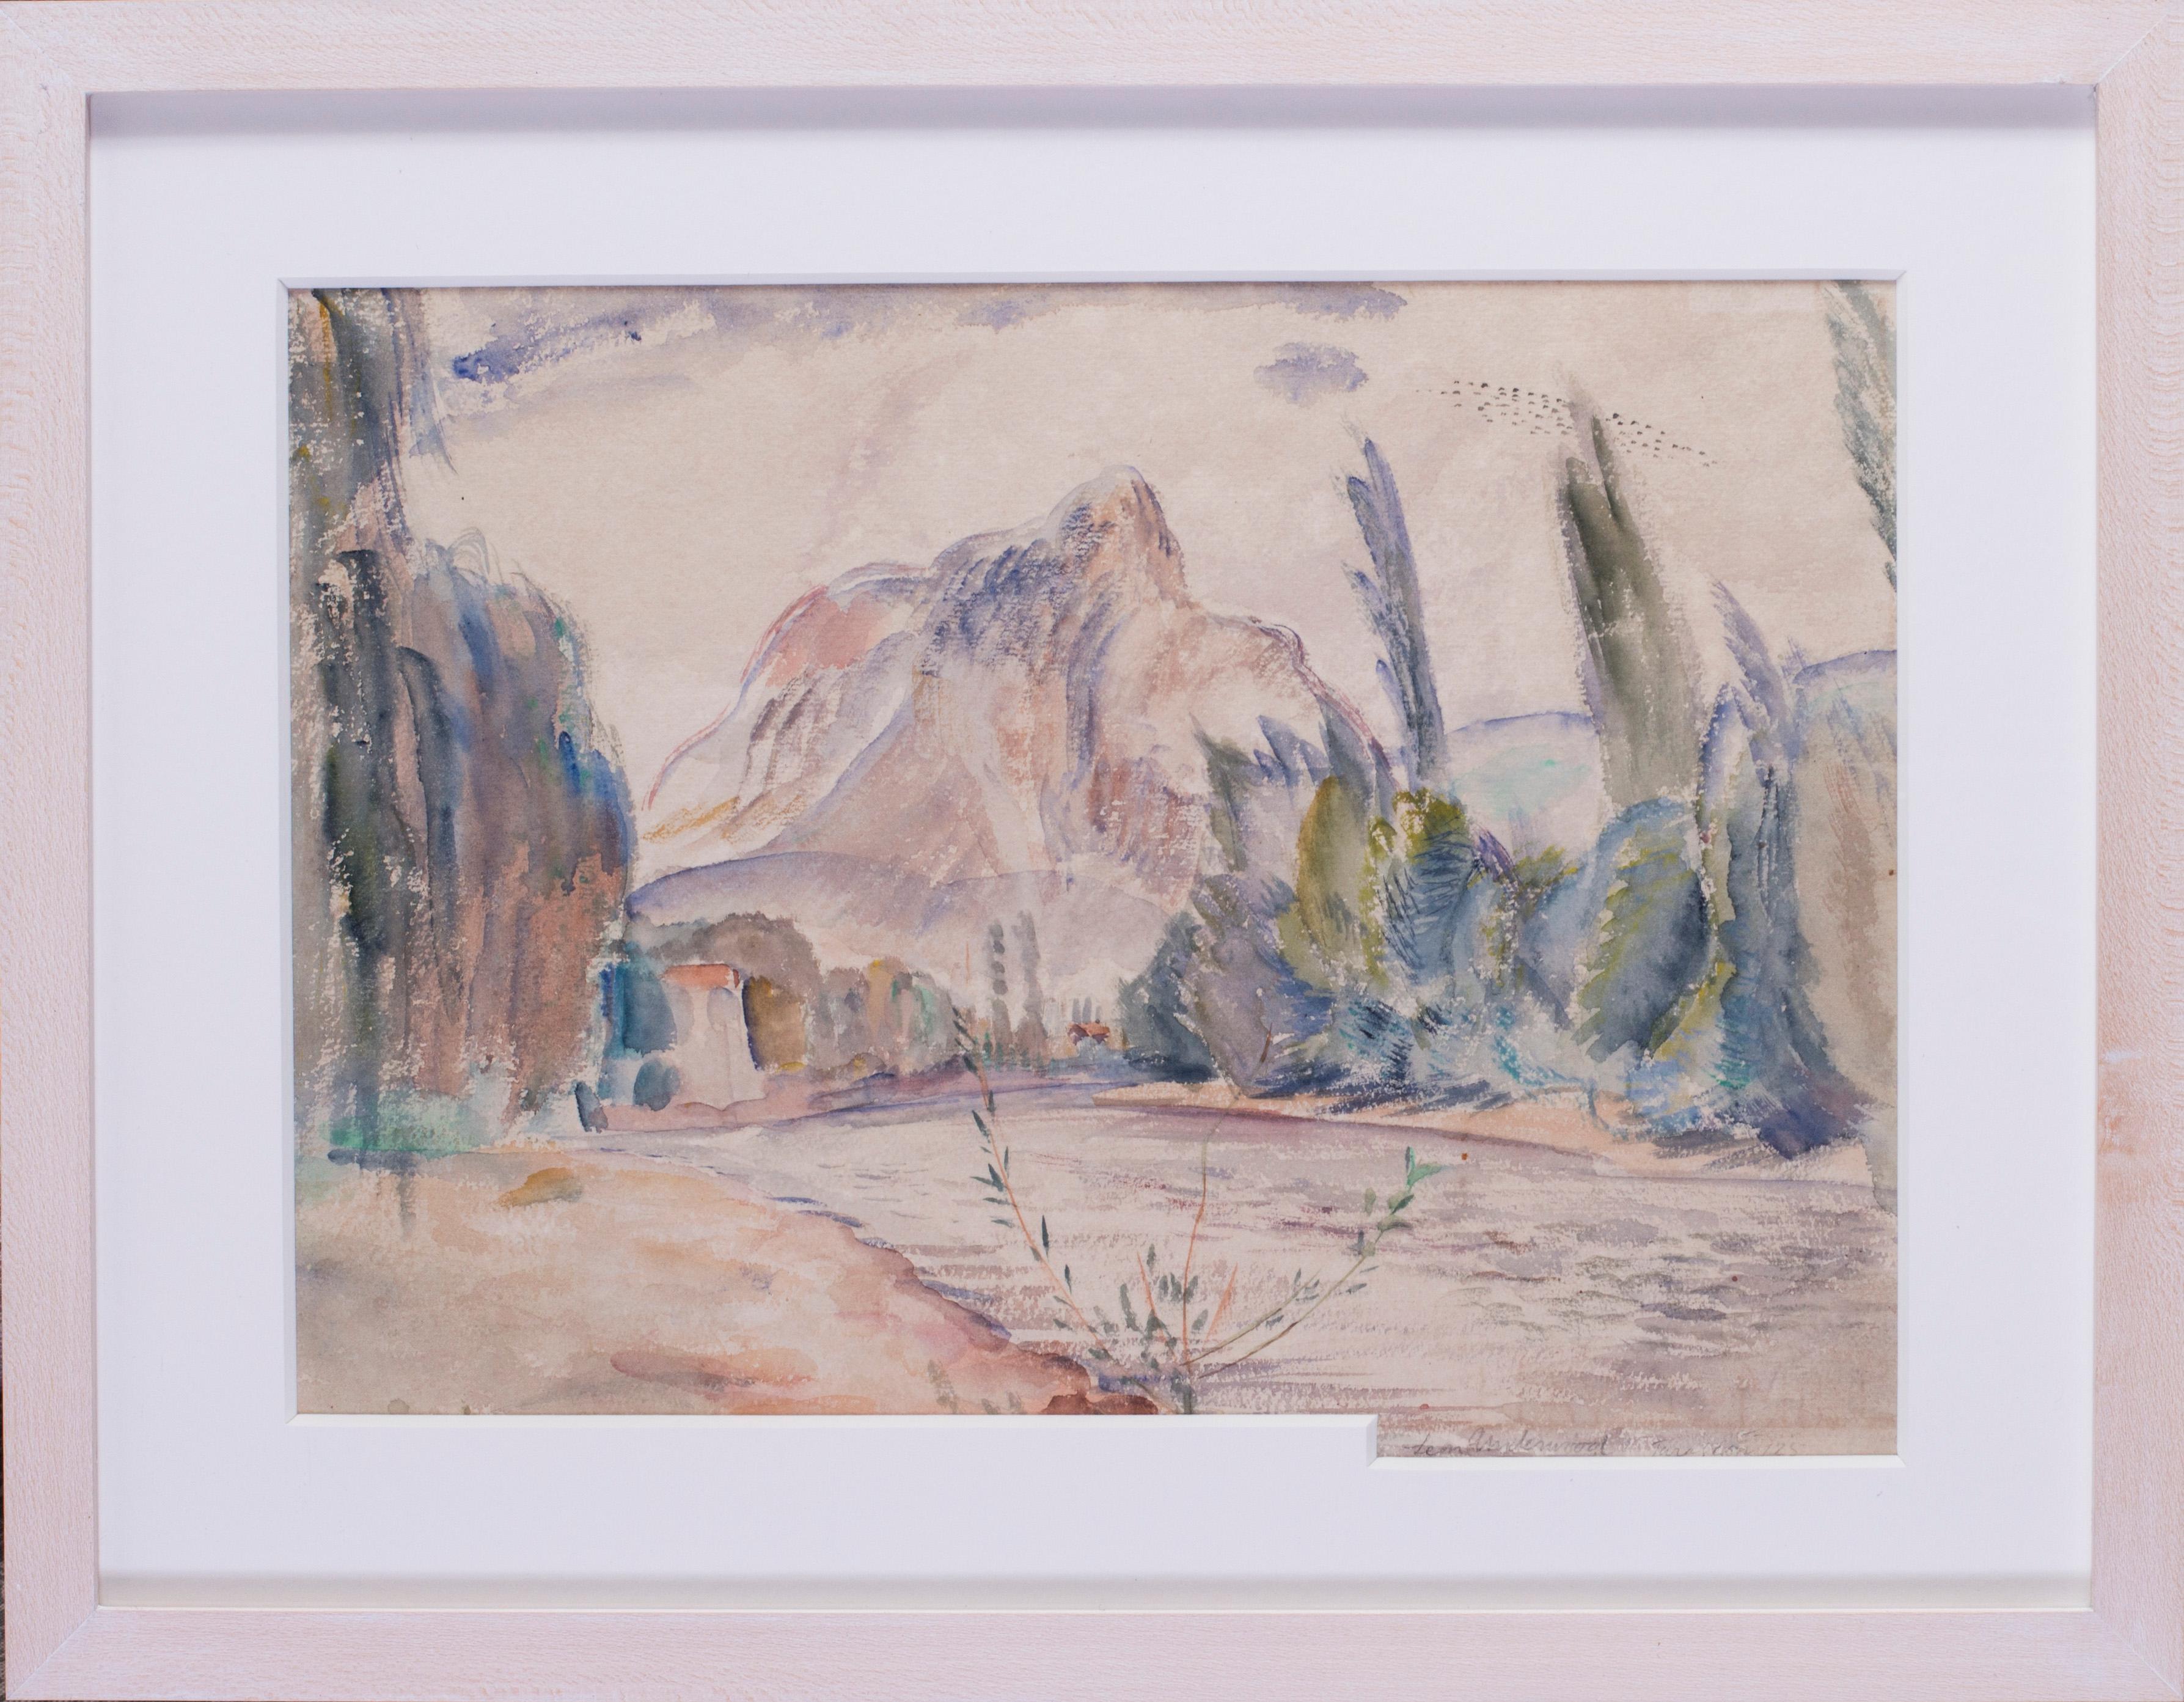 Leon Underwood (British, 1890 – 1975)
A River landscape in Italy
Signed, inscribed indistinctly and dated ’25.
Watercolour on paper
10.5/8 x 14.1/2 in. (27 x 37 cm.)

Underwood was known as the precursor of modern sculpture in Britain according to